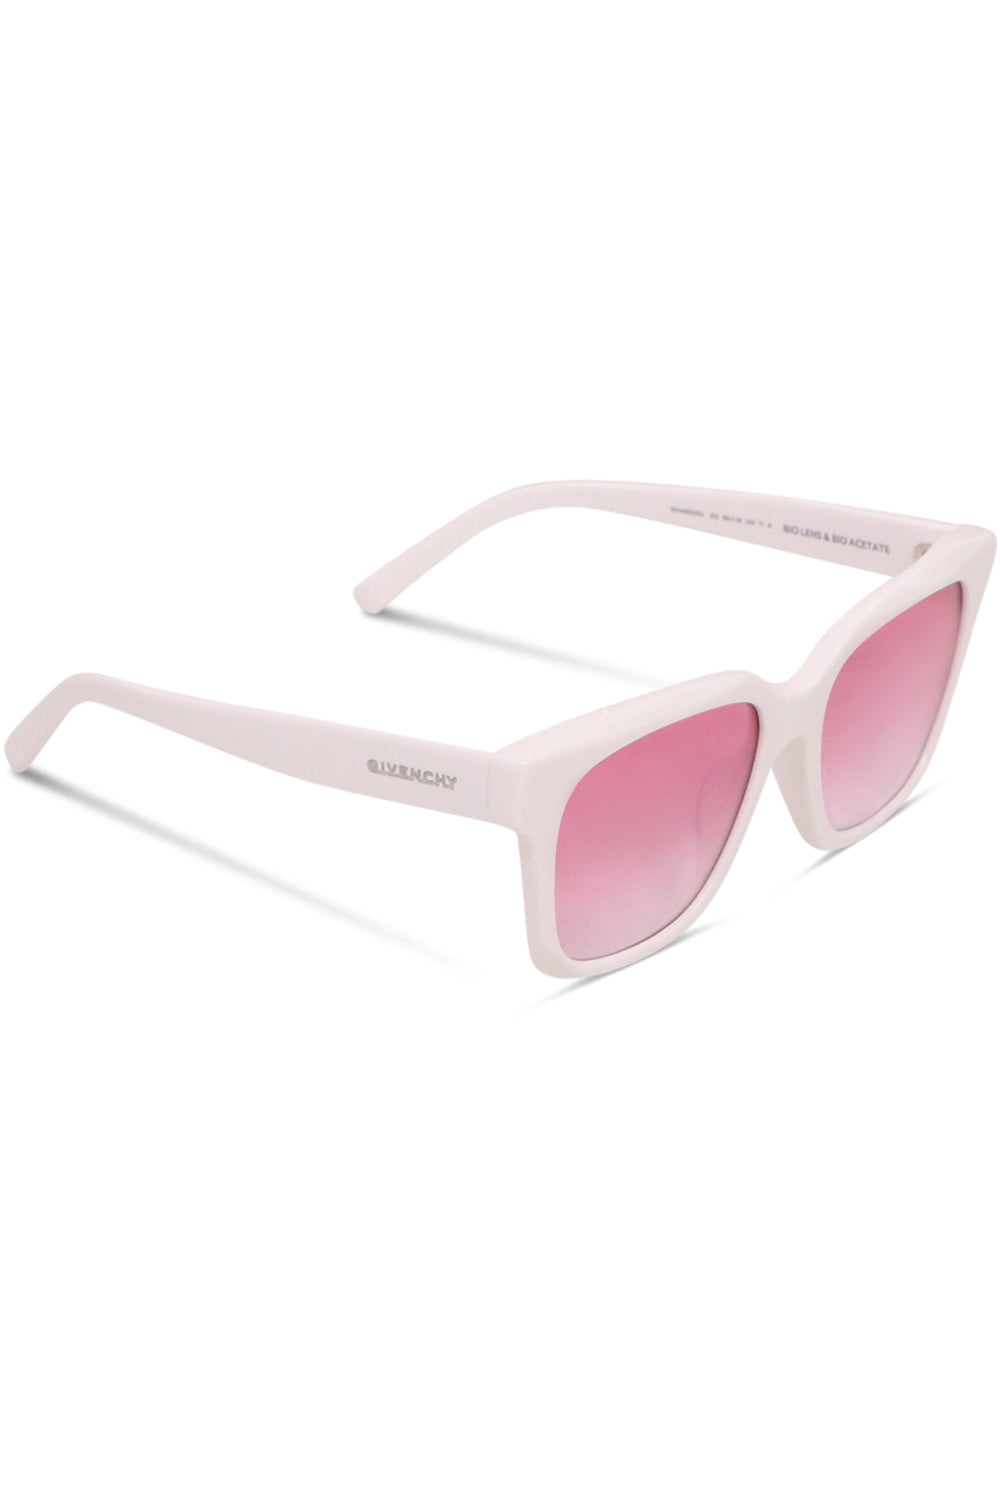 GIVENCHY ACCESSORIES MULTI RECTANGLE SUNGLASSES | WHITE/PINK